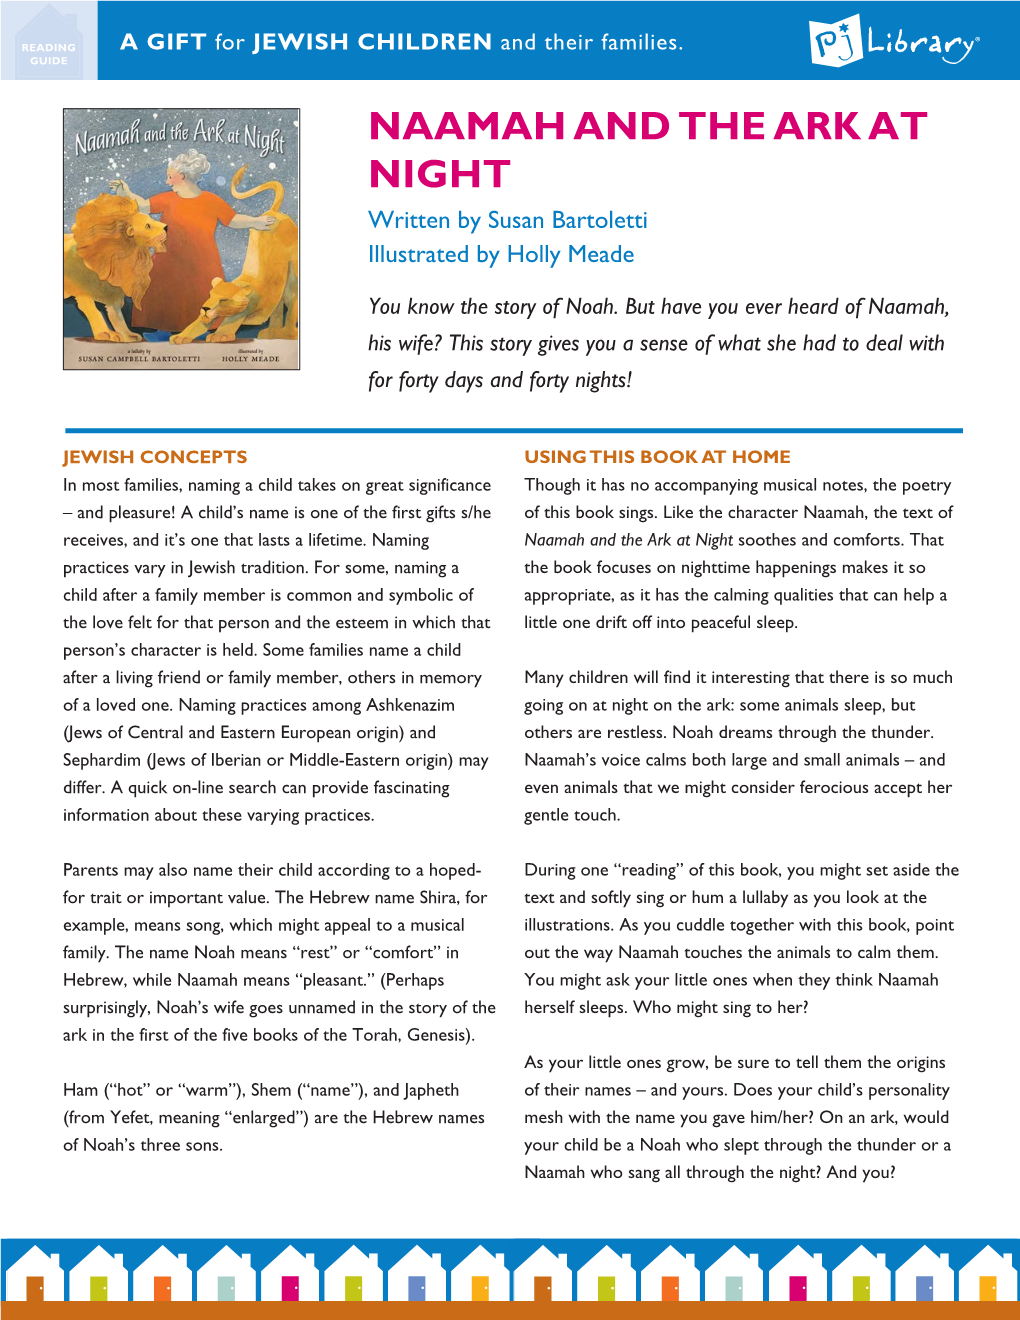 NAAMAH and the ARK at NIGHT Written by Susan Bartoletti Illustrated by Holly Meade